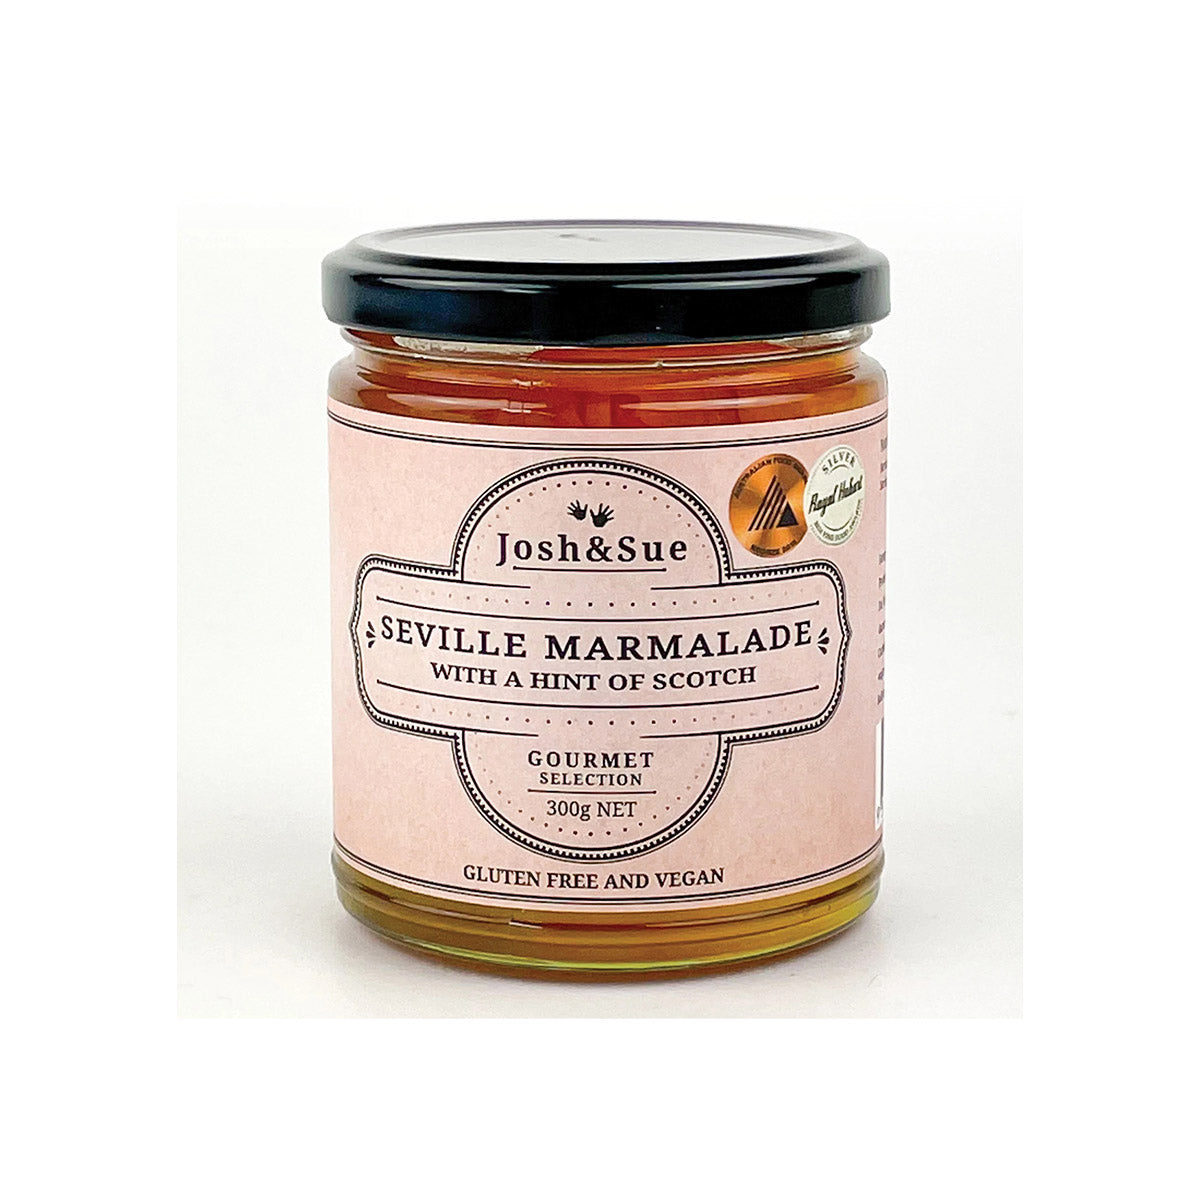 Seville Marmalade with Scotch